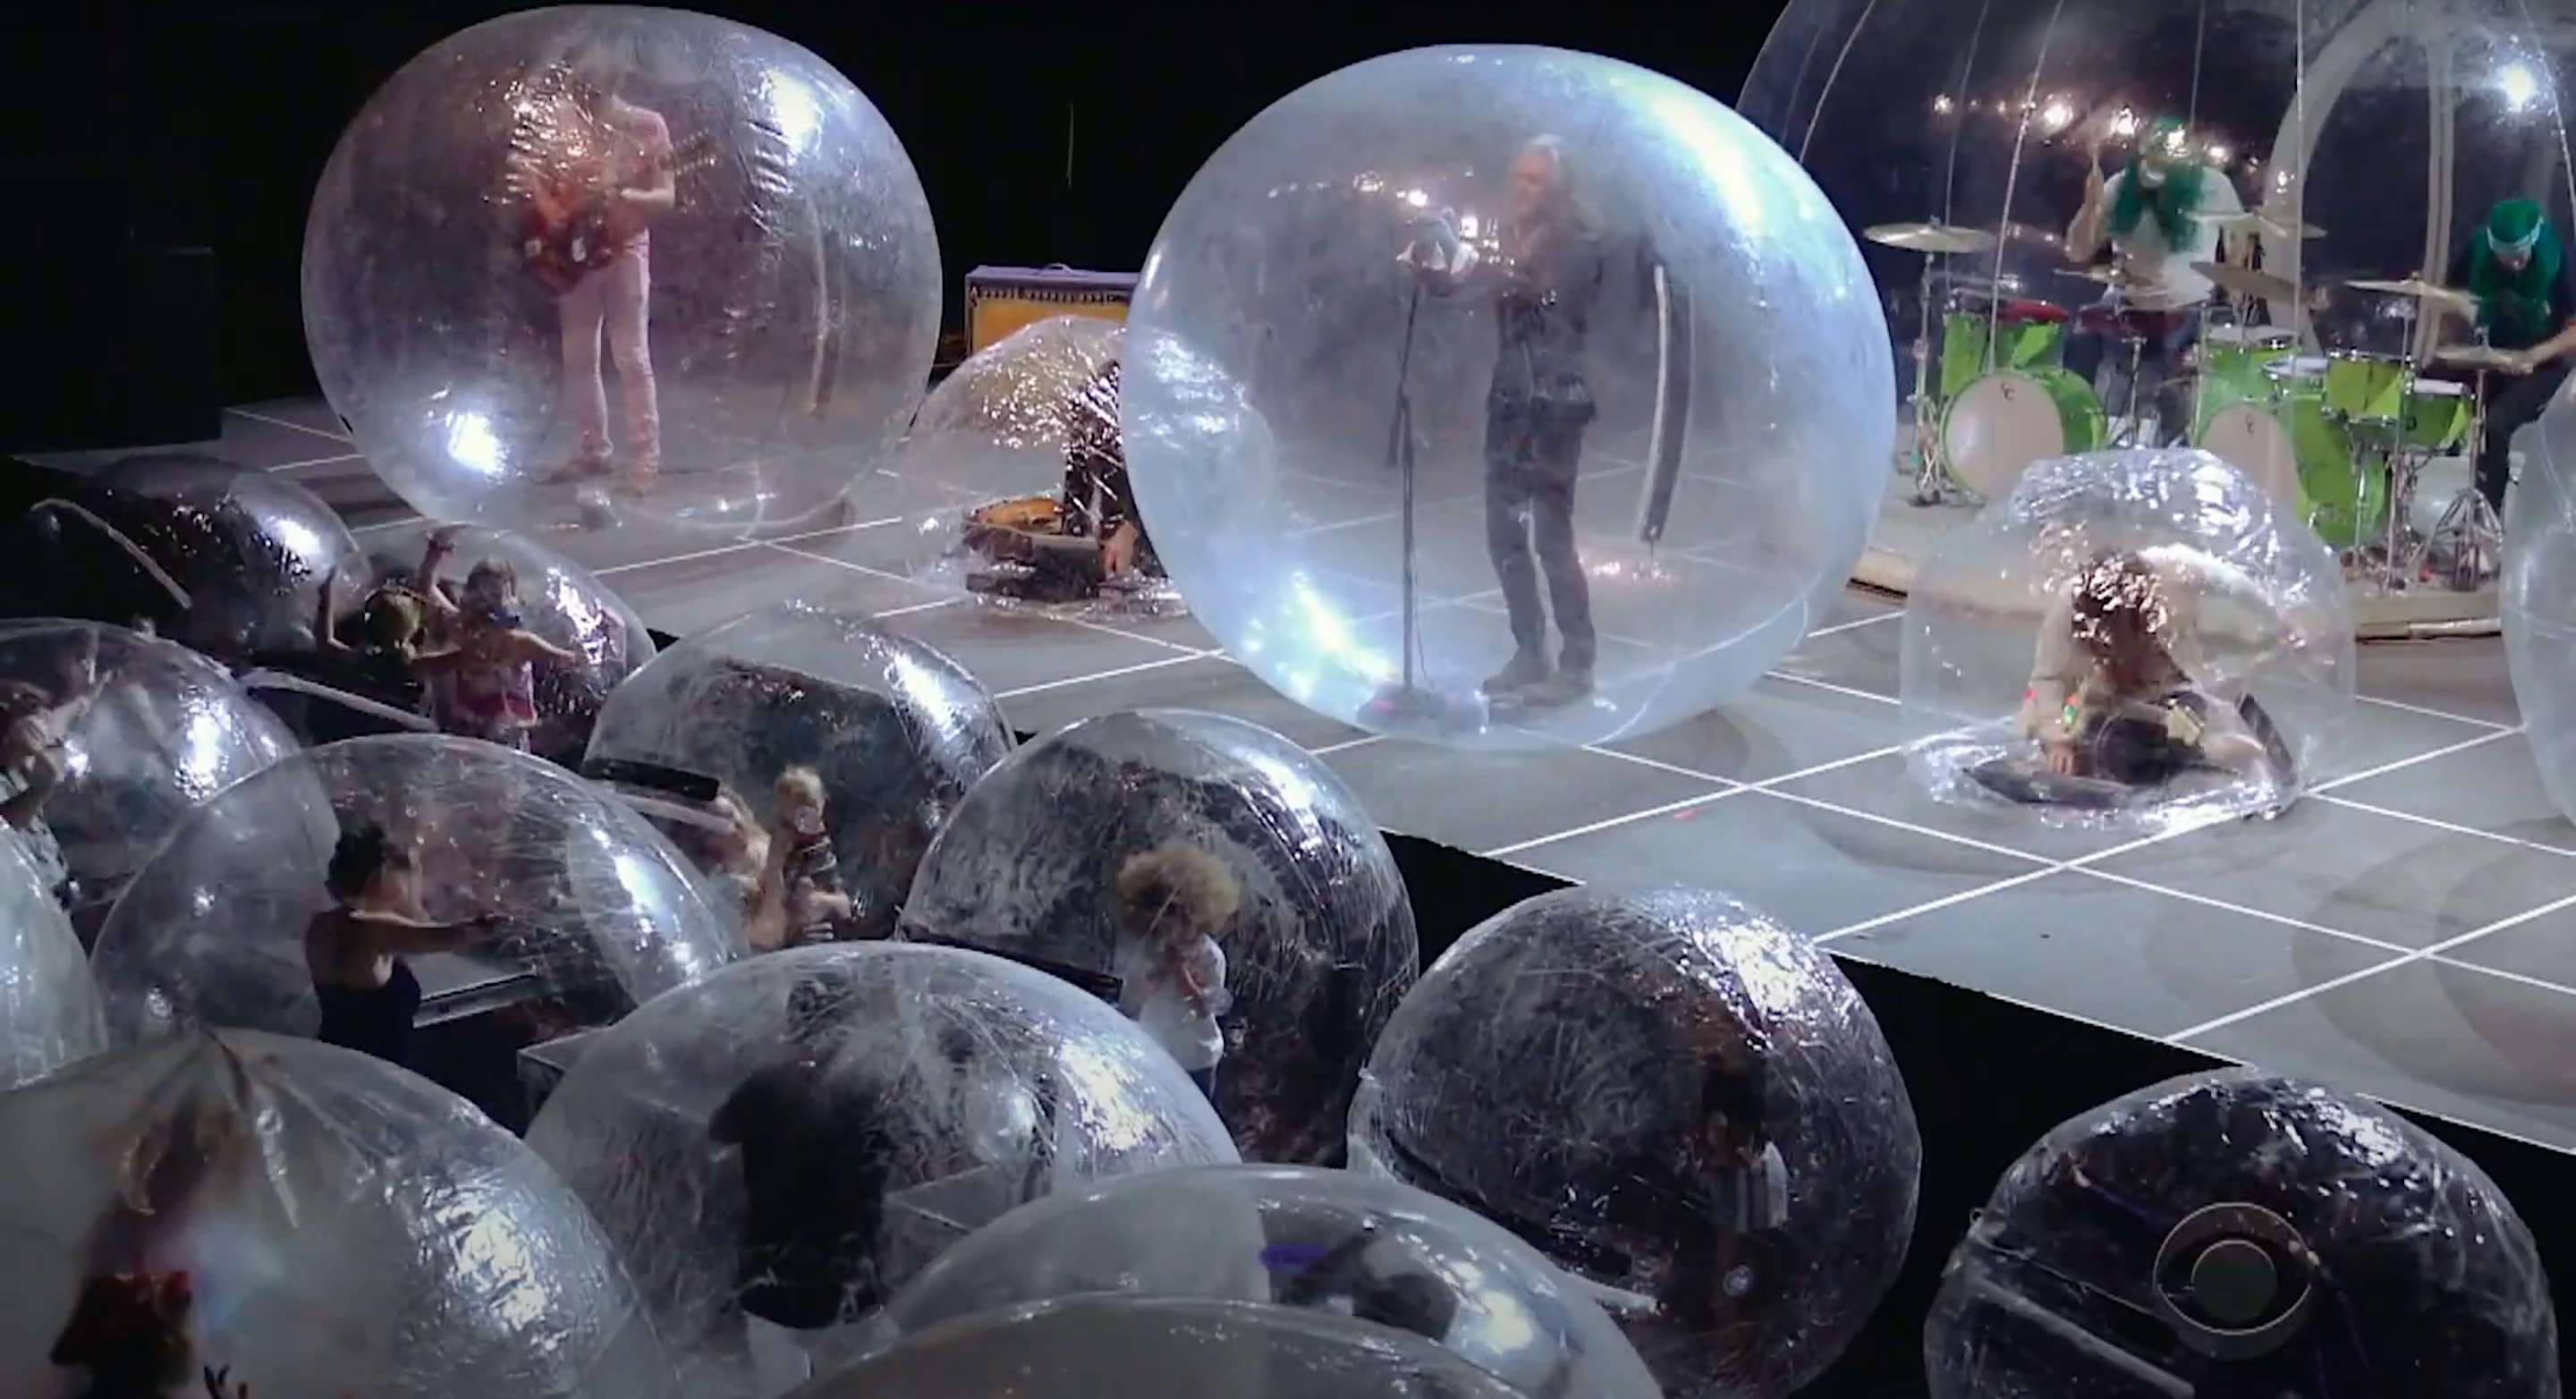 The Flaming Lips perform in bubbles